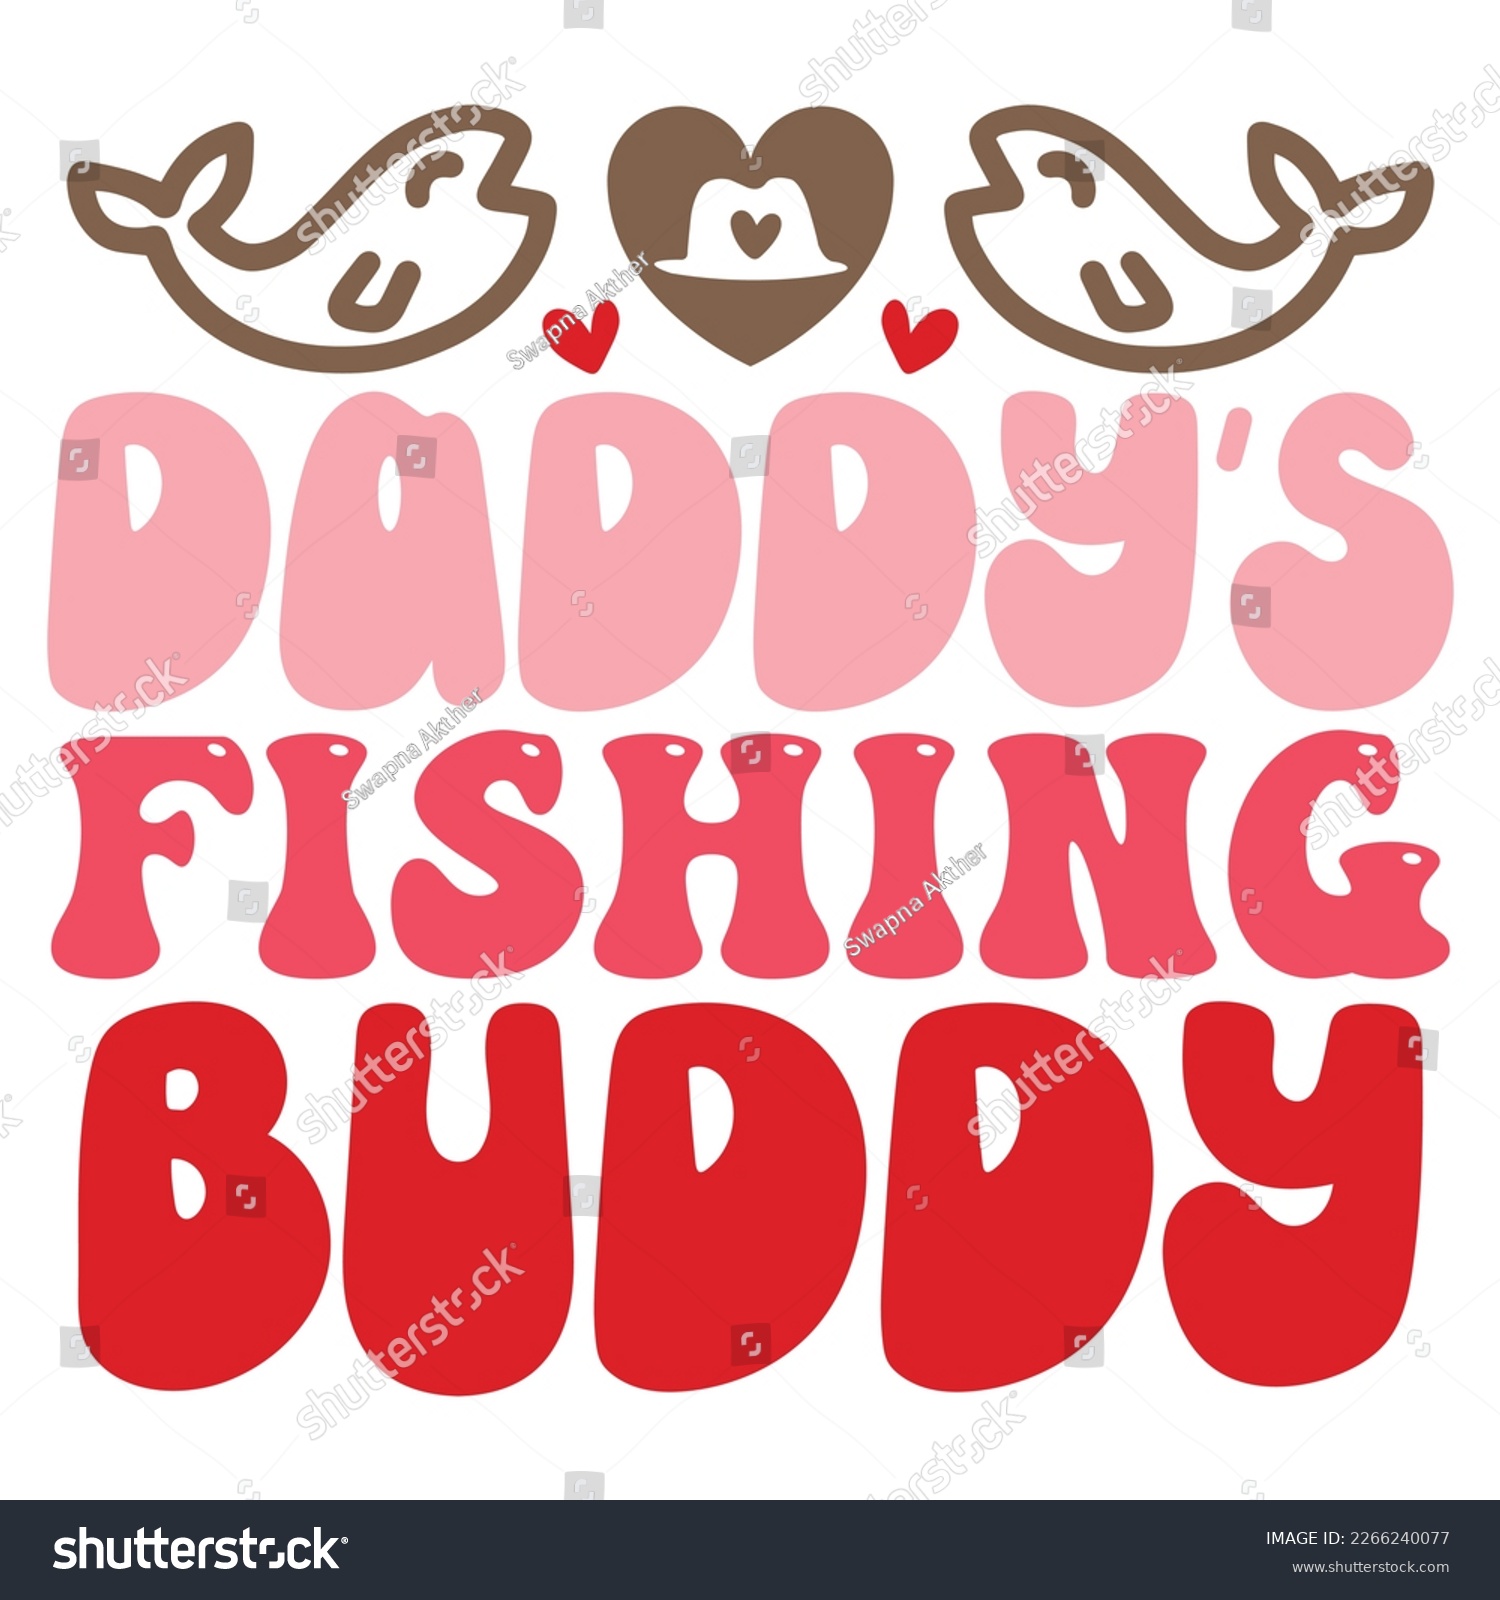 SVG of Daddy’s Fishing Buddy - Dad Retro T-shirt And SVG Design. Retro Happy Father's Day, Motivational Inspirational SVG Quotes T shirt Design, Vector EPS Editable Files. svg